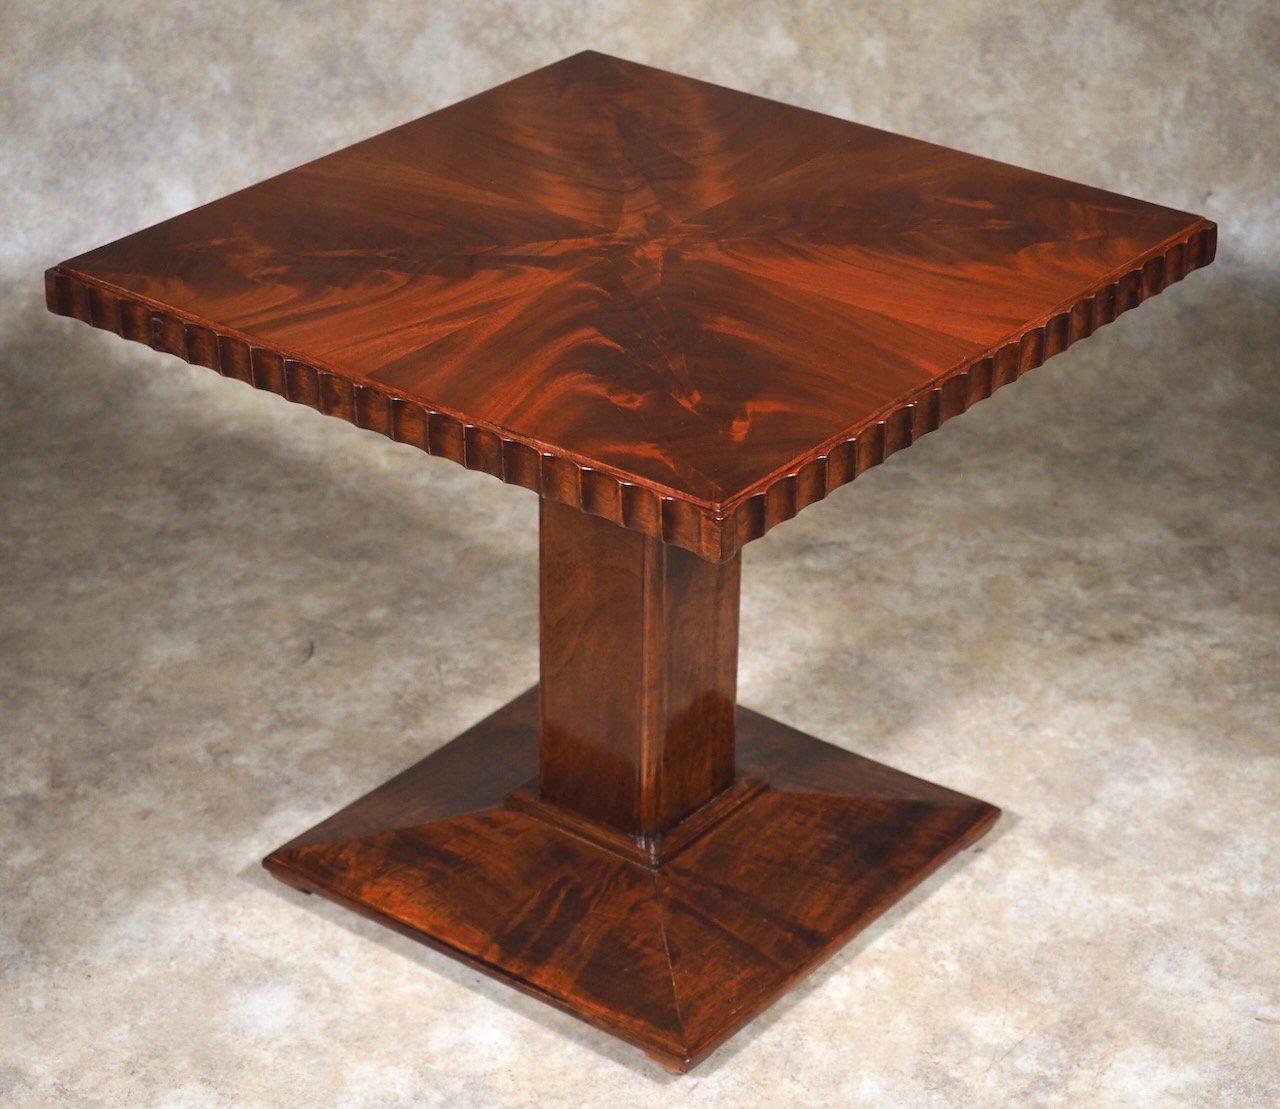 French Art Deco side in sculpted mahogany with quarter-matched top, circa 1925, by DIM (Joubert et Petit). 24” square x 21” high.

DIM - Decoration Interieure Moderne


RENE JOUBERT (? -d. 1931) and PHILIPPE PETIT (1900-1945)


The